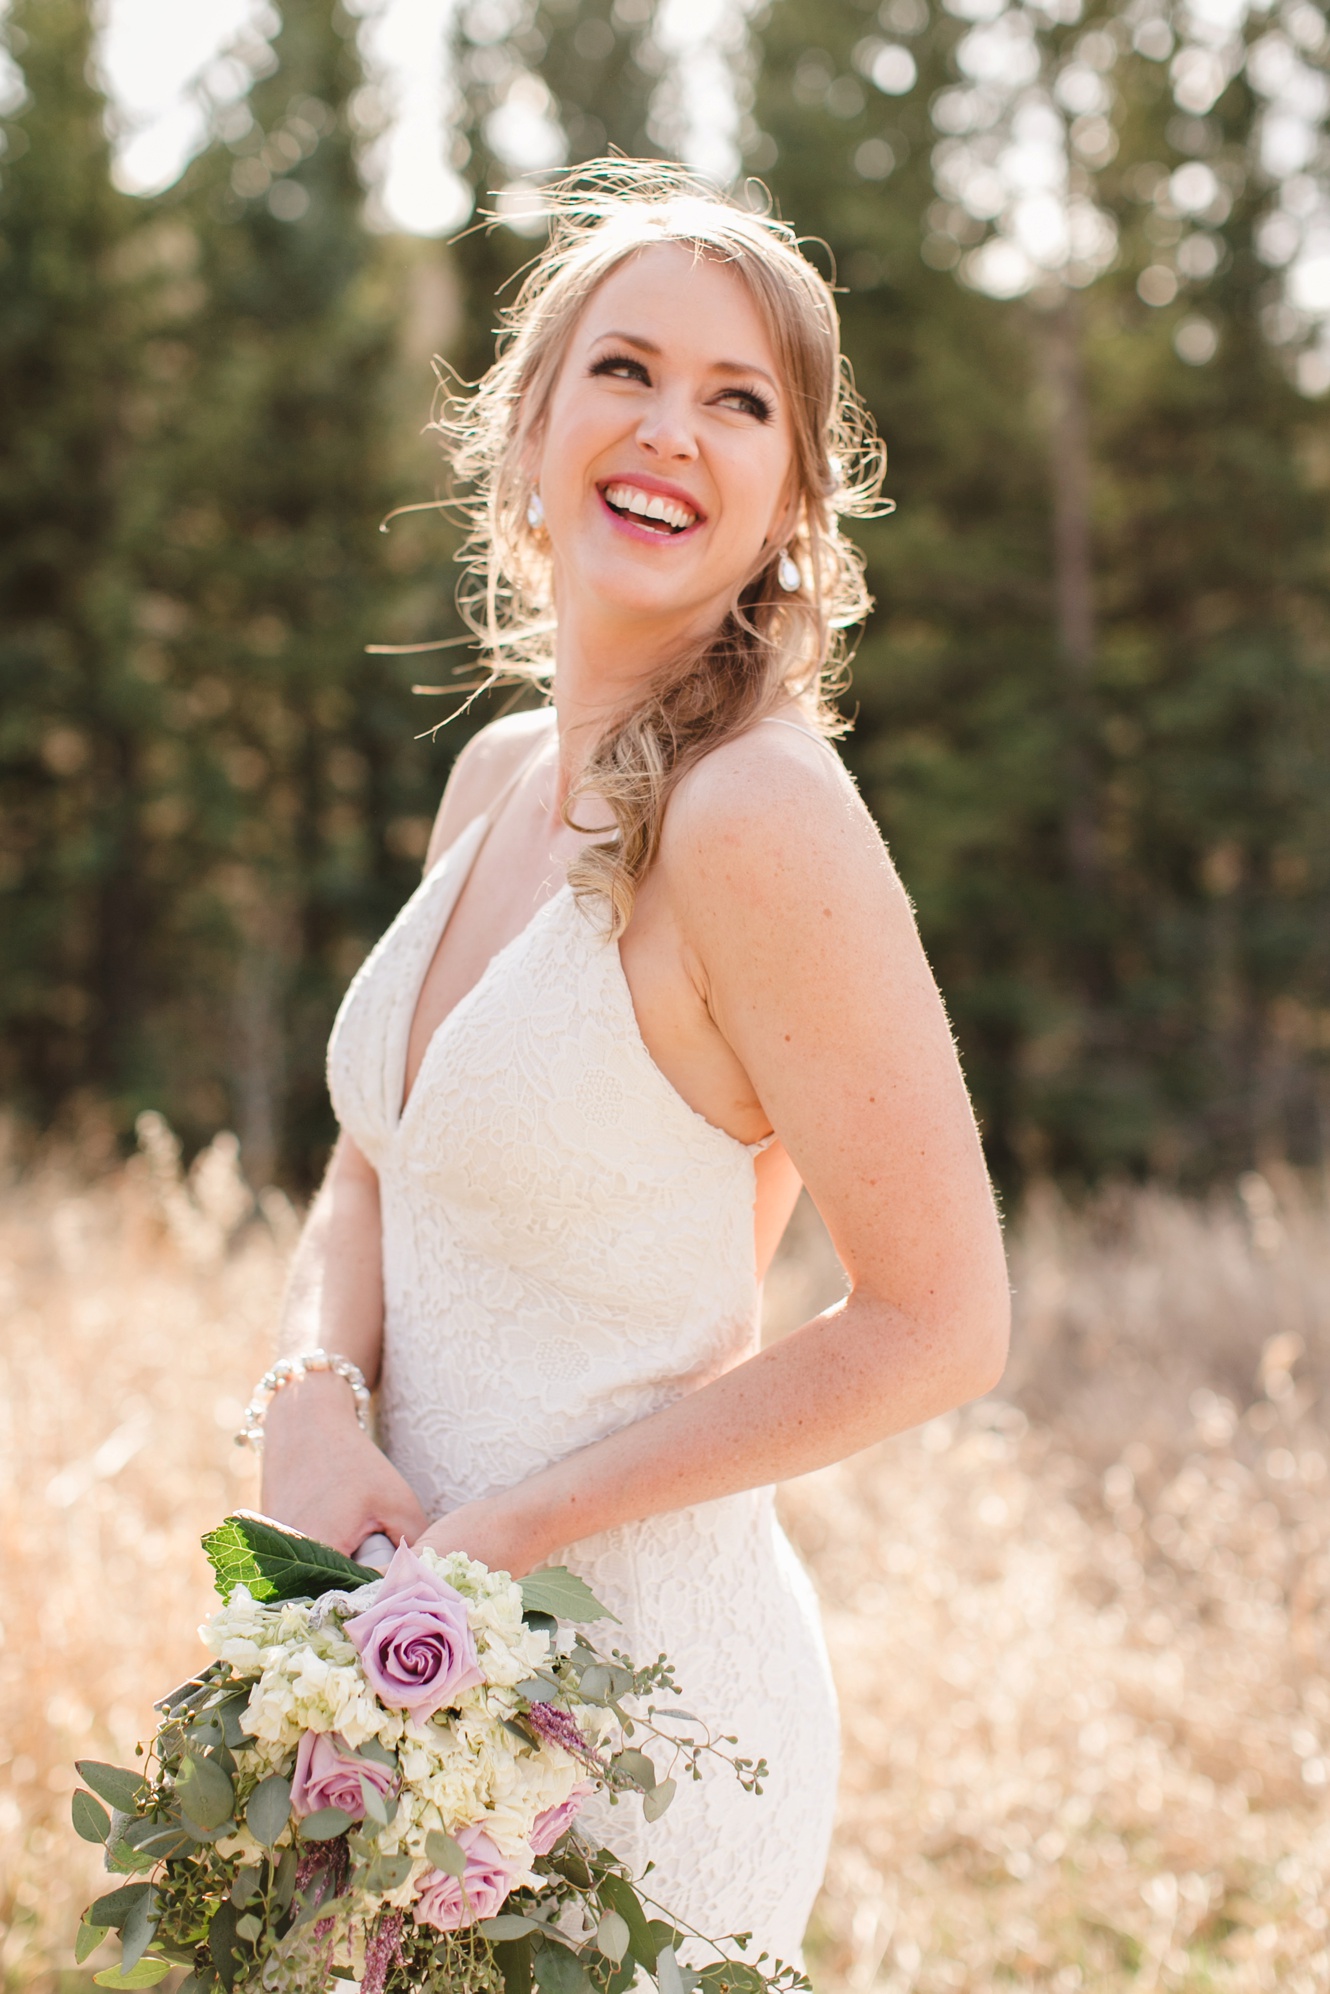 Laughing bride photo